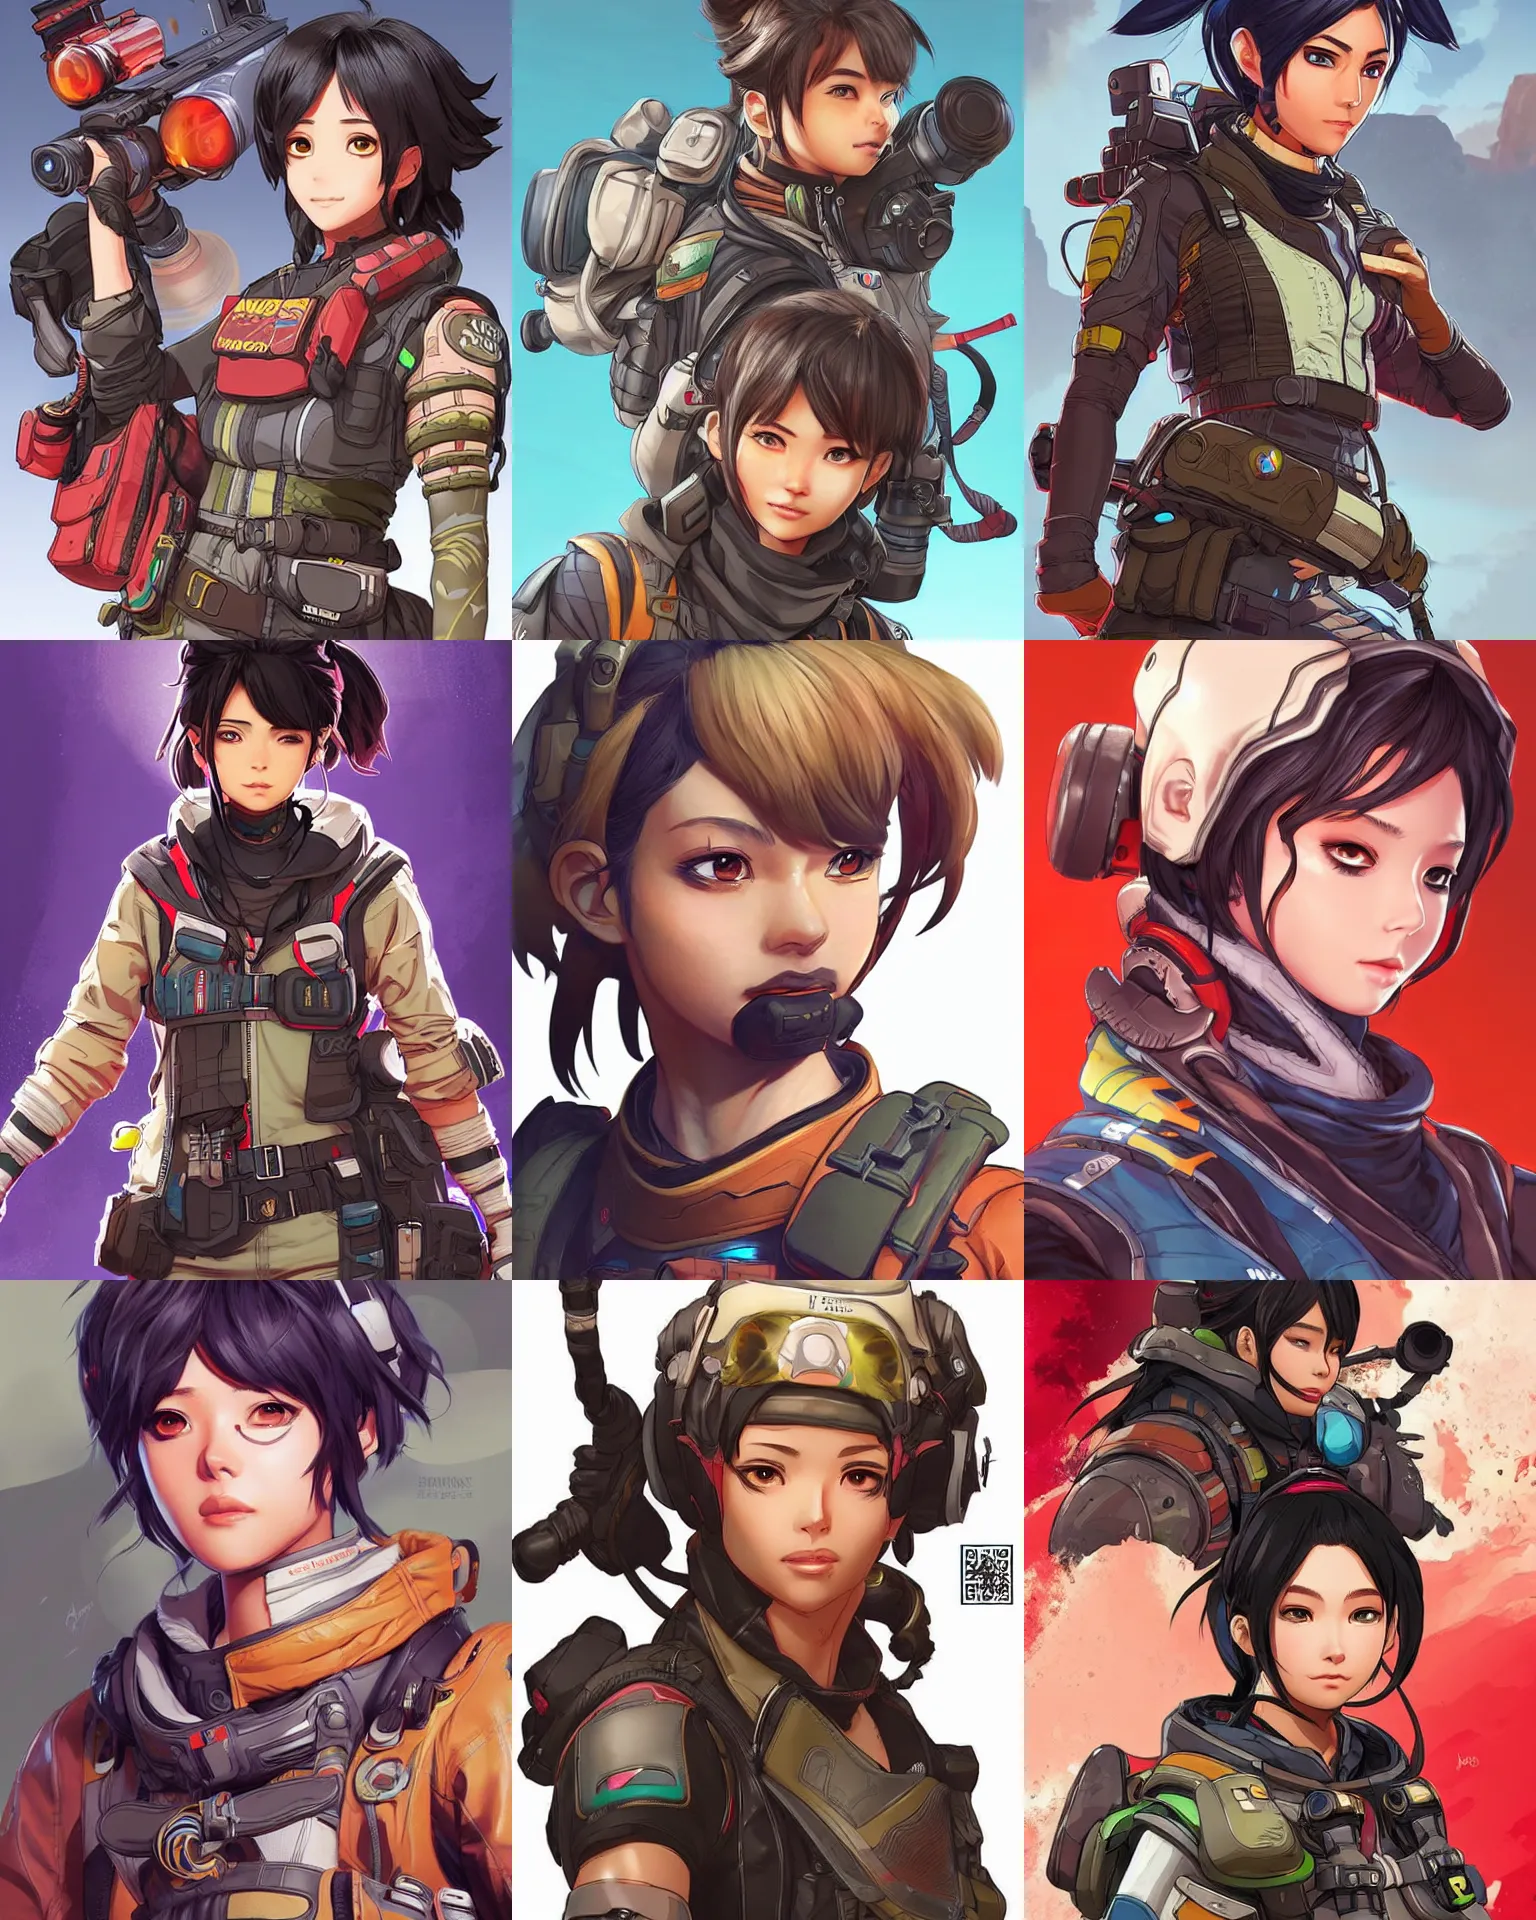 Anime is Art - Apex legends By Iwamoto 05... | Facebook